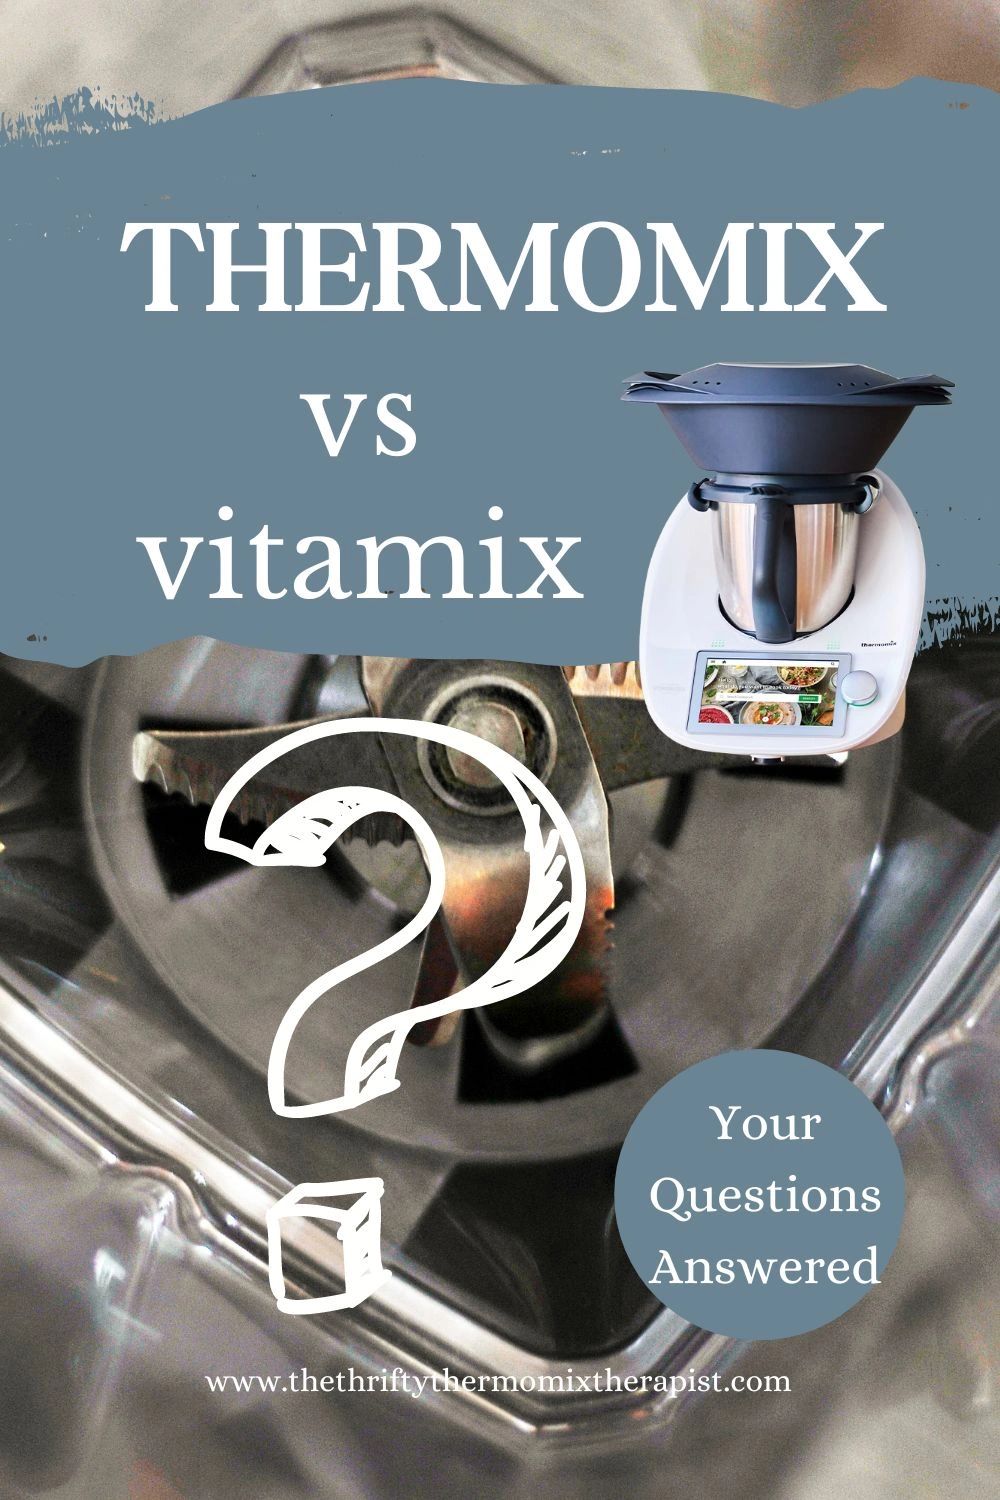 Thermomix vs Vitamix: Which One is Right for Busy Parents?